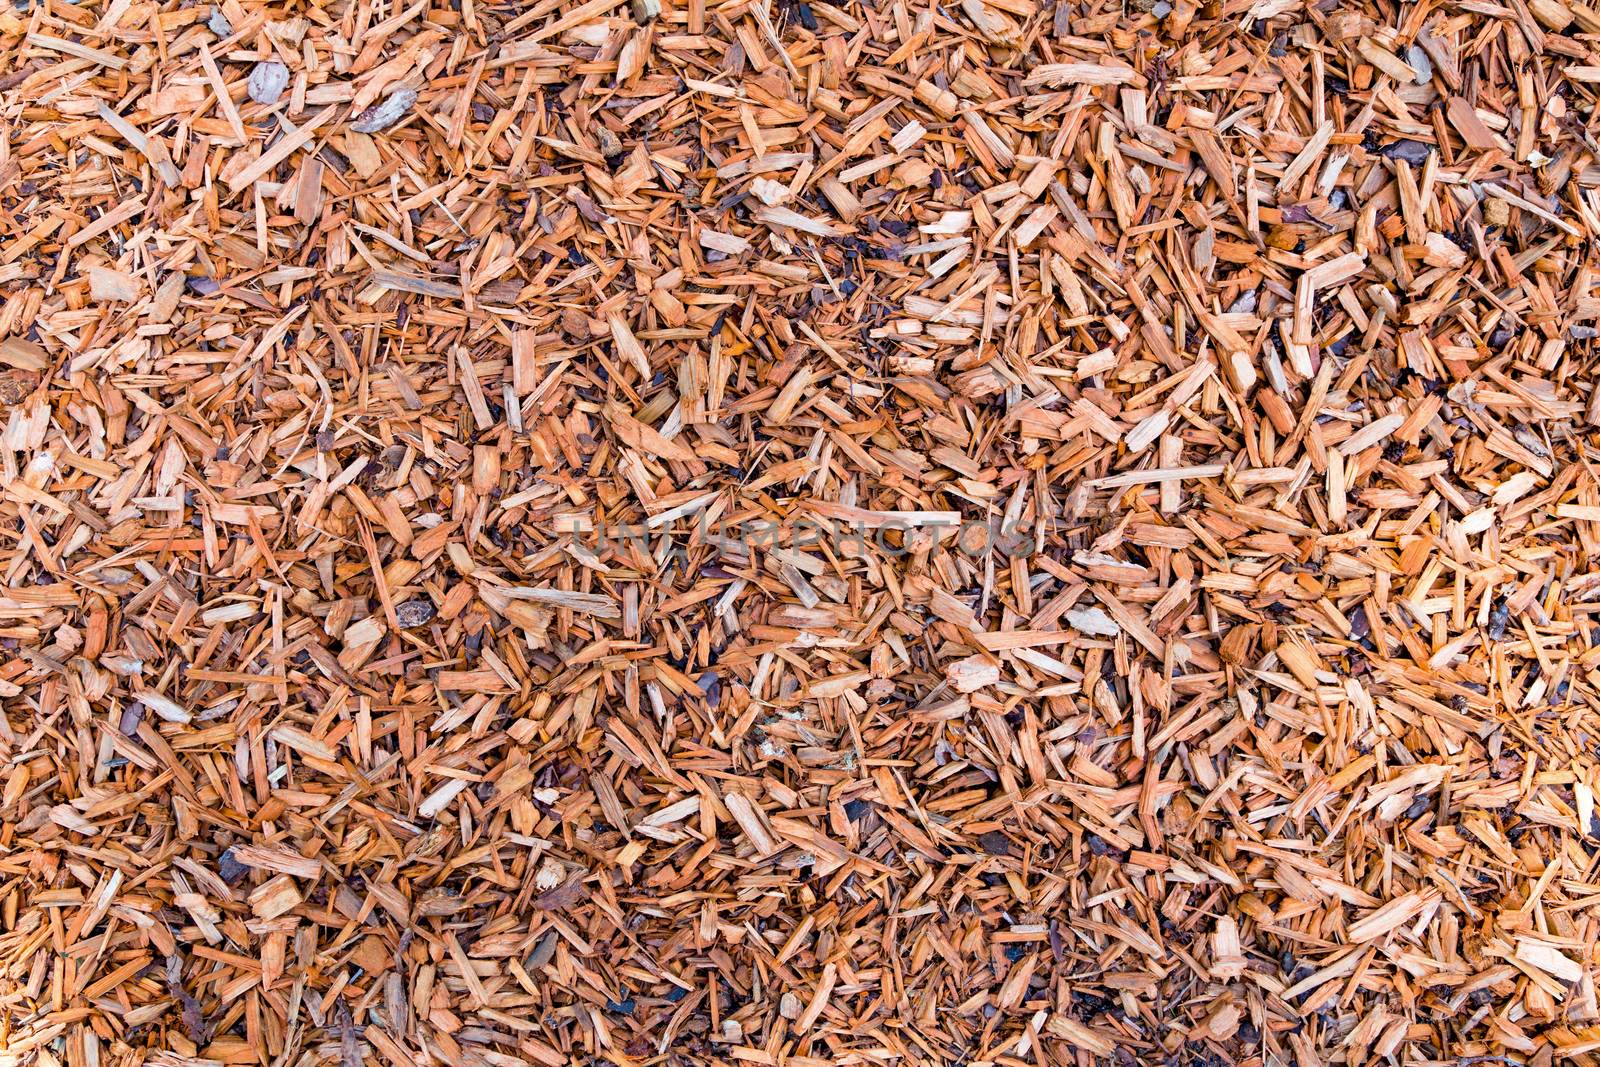 Woodchips little pieces of wood on ground as background